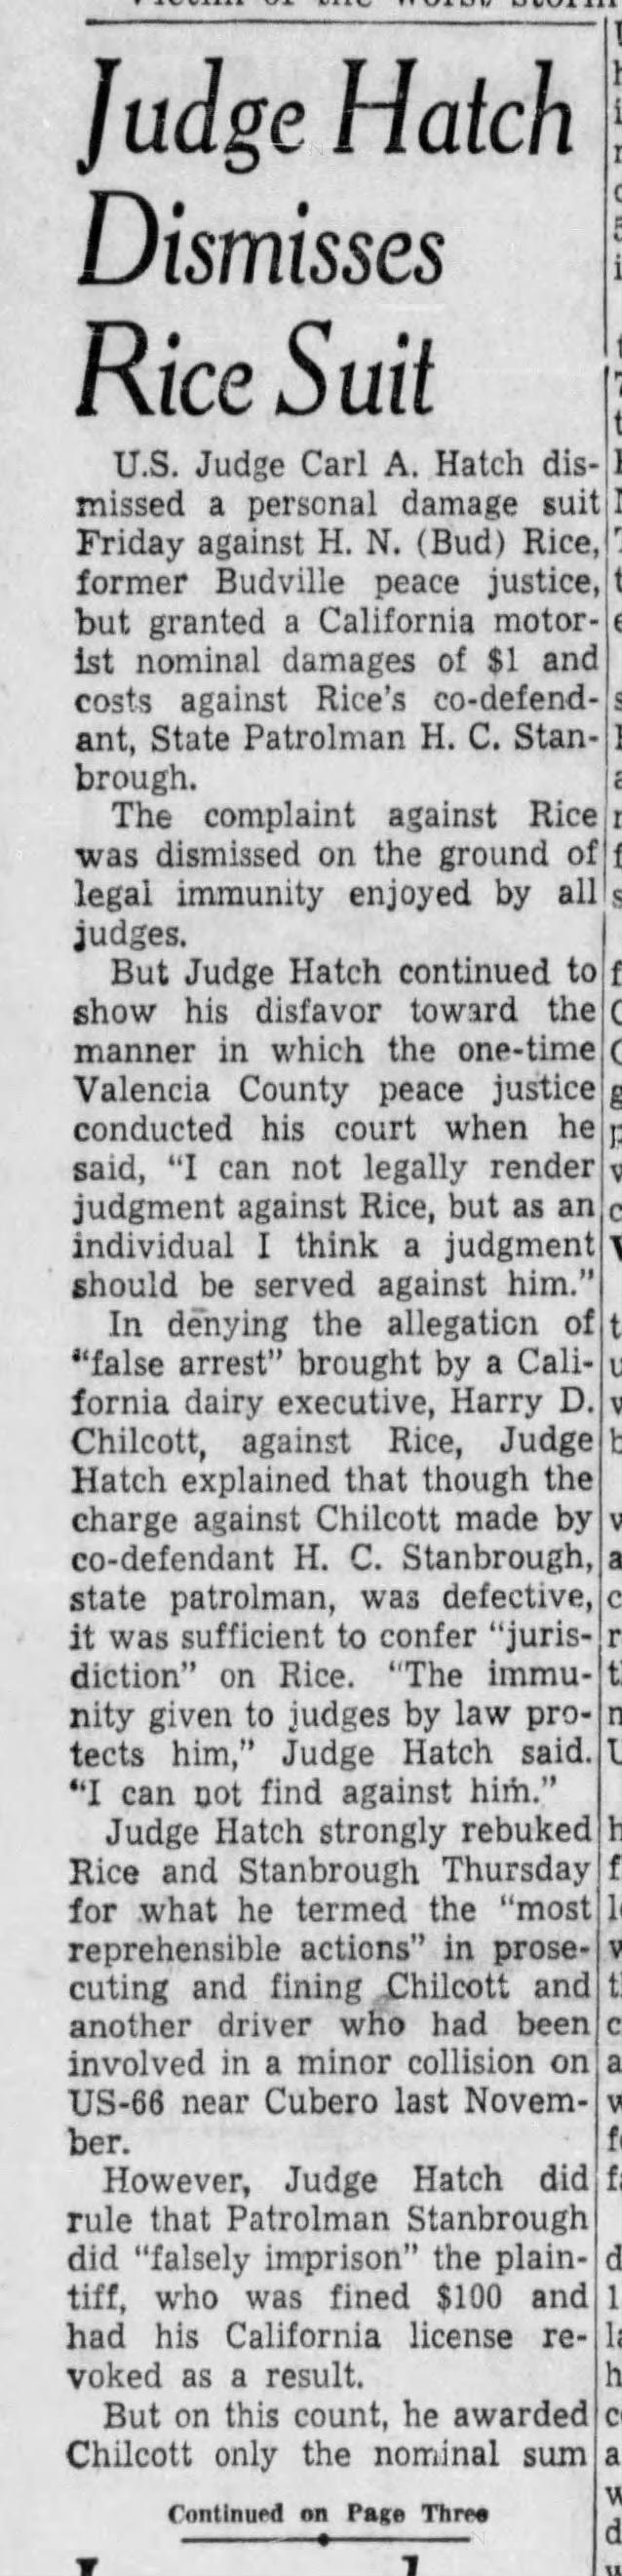 Judge Hatch Dismisses Bud Rice Suit.
May 28, 1955
Budville, New Mexico near Cubero